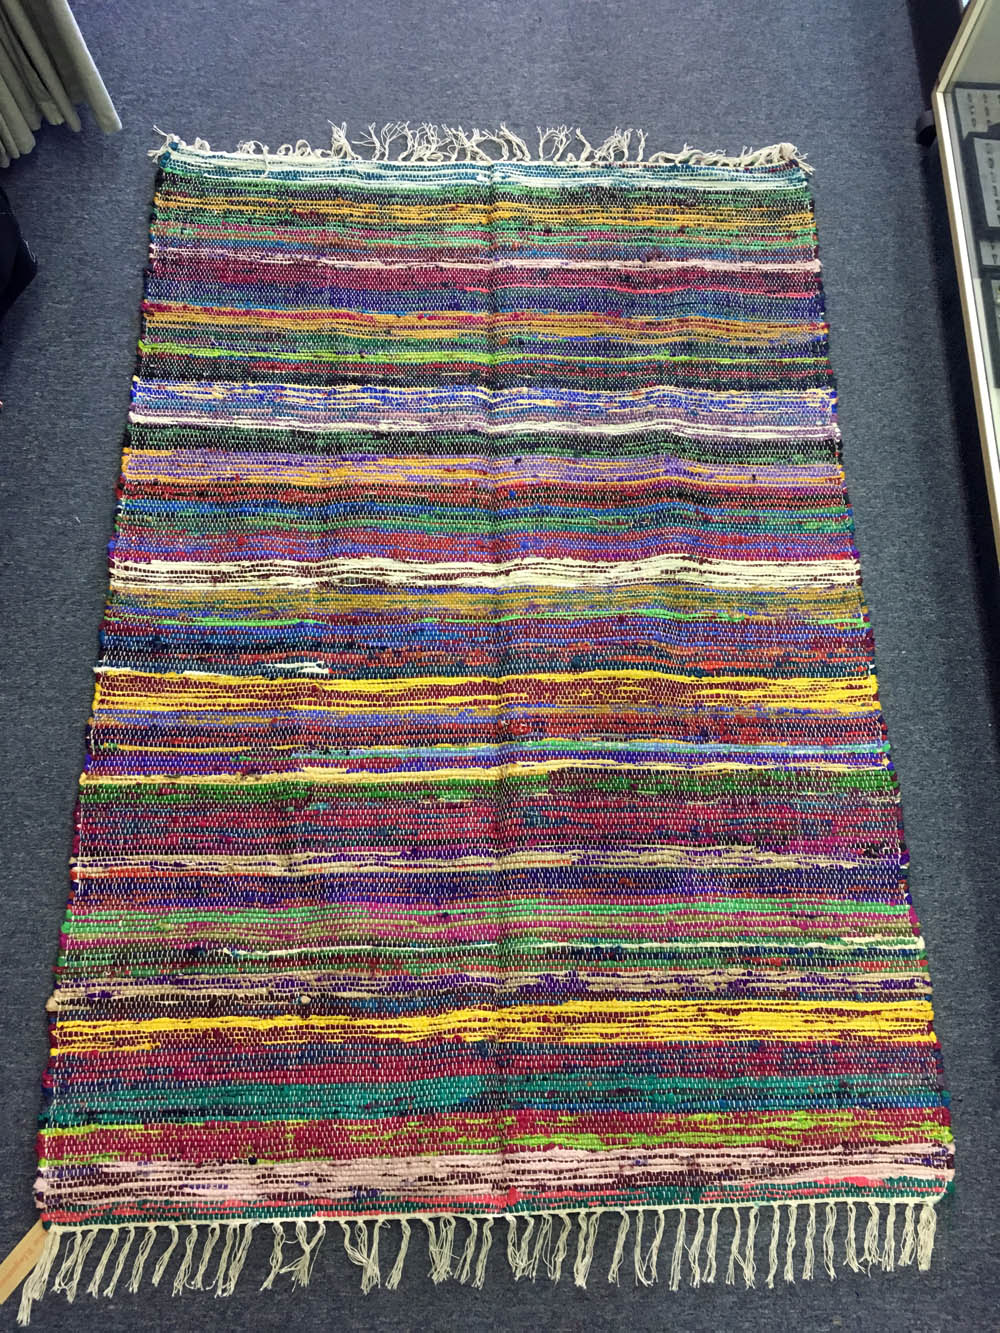 Large Chindi Rug from India, 4' x 6'